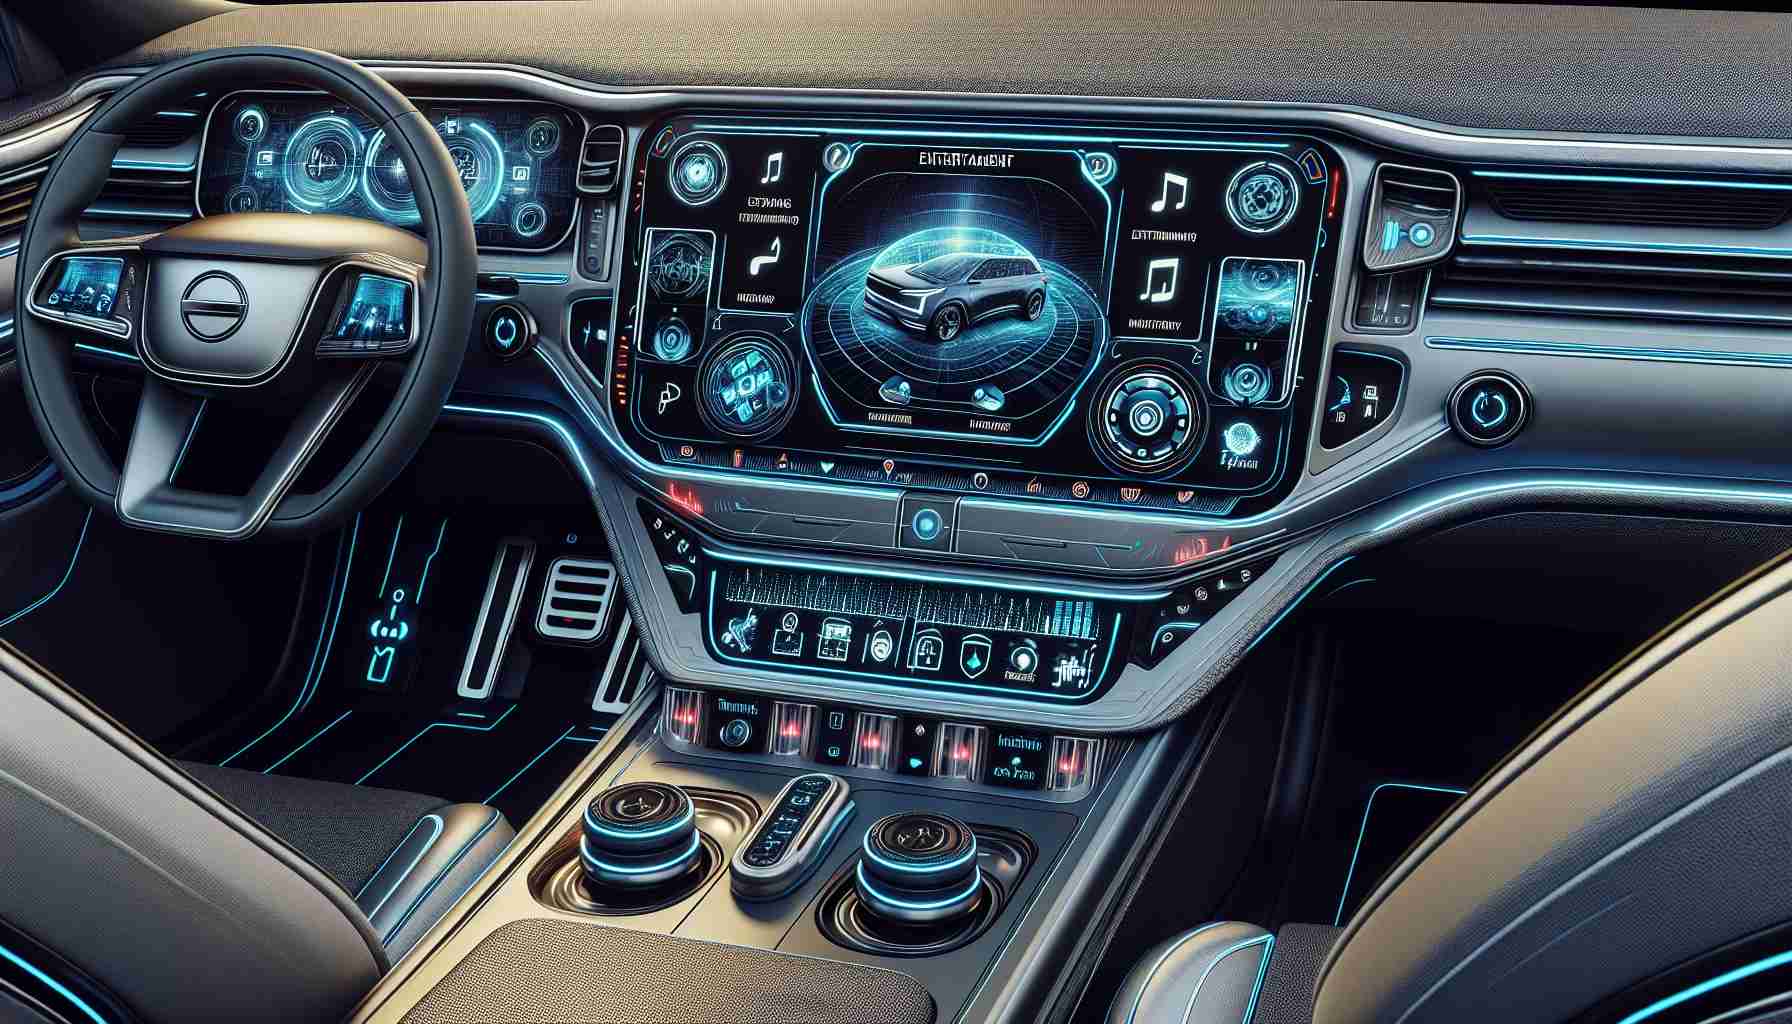 A detailed image of futuristic in-car entertainment using cutting-edge technology. The interior of the car showcases a large, multi-functional display taking the place of the dashboard. The display shows navigation, entertainment options such as music playlists and streaming services. To the sides, integrated controls for climate and vehicle setting adjustments. On the rear seats, individual entertainment systems are presented. High resolution and realistic detailing is emphasized, portraying the advanced technology within the car.